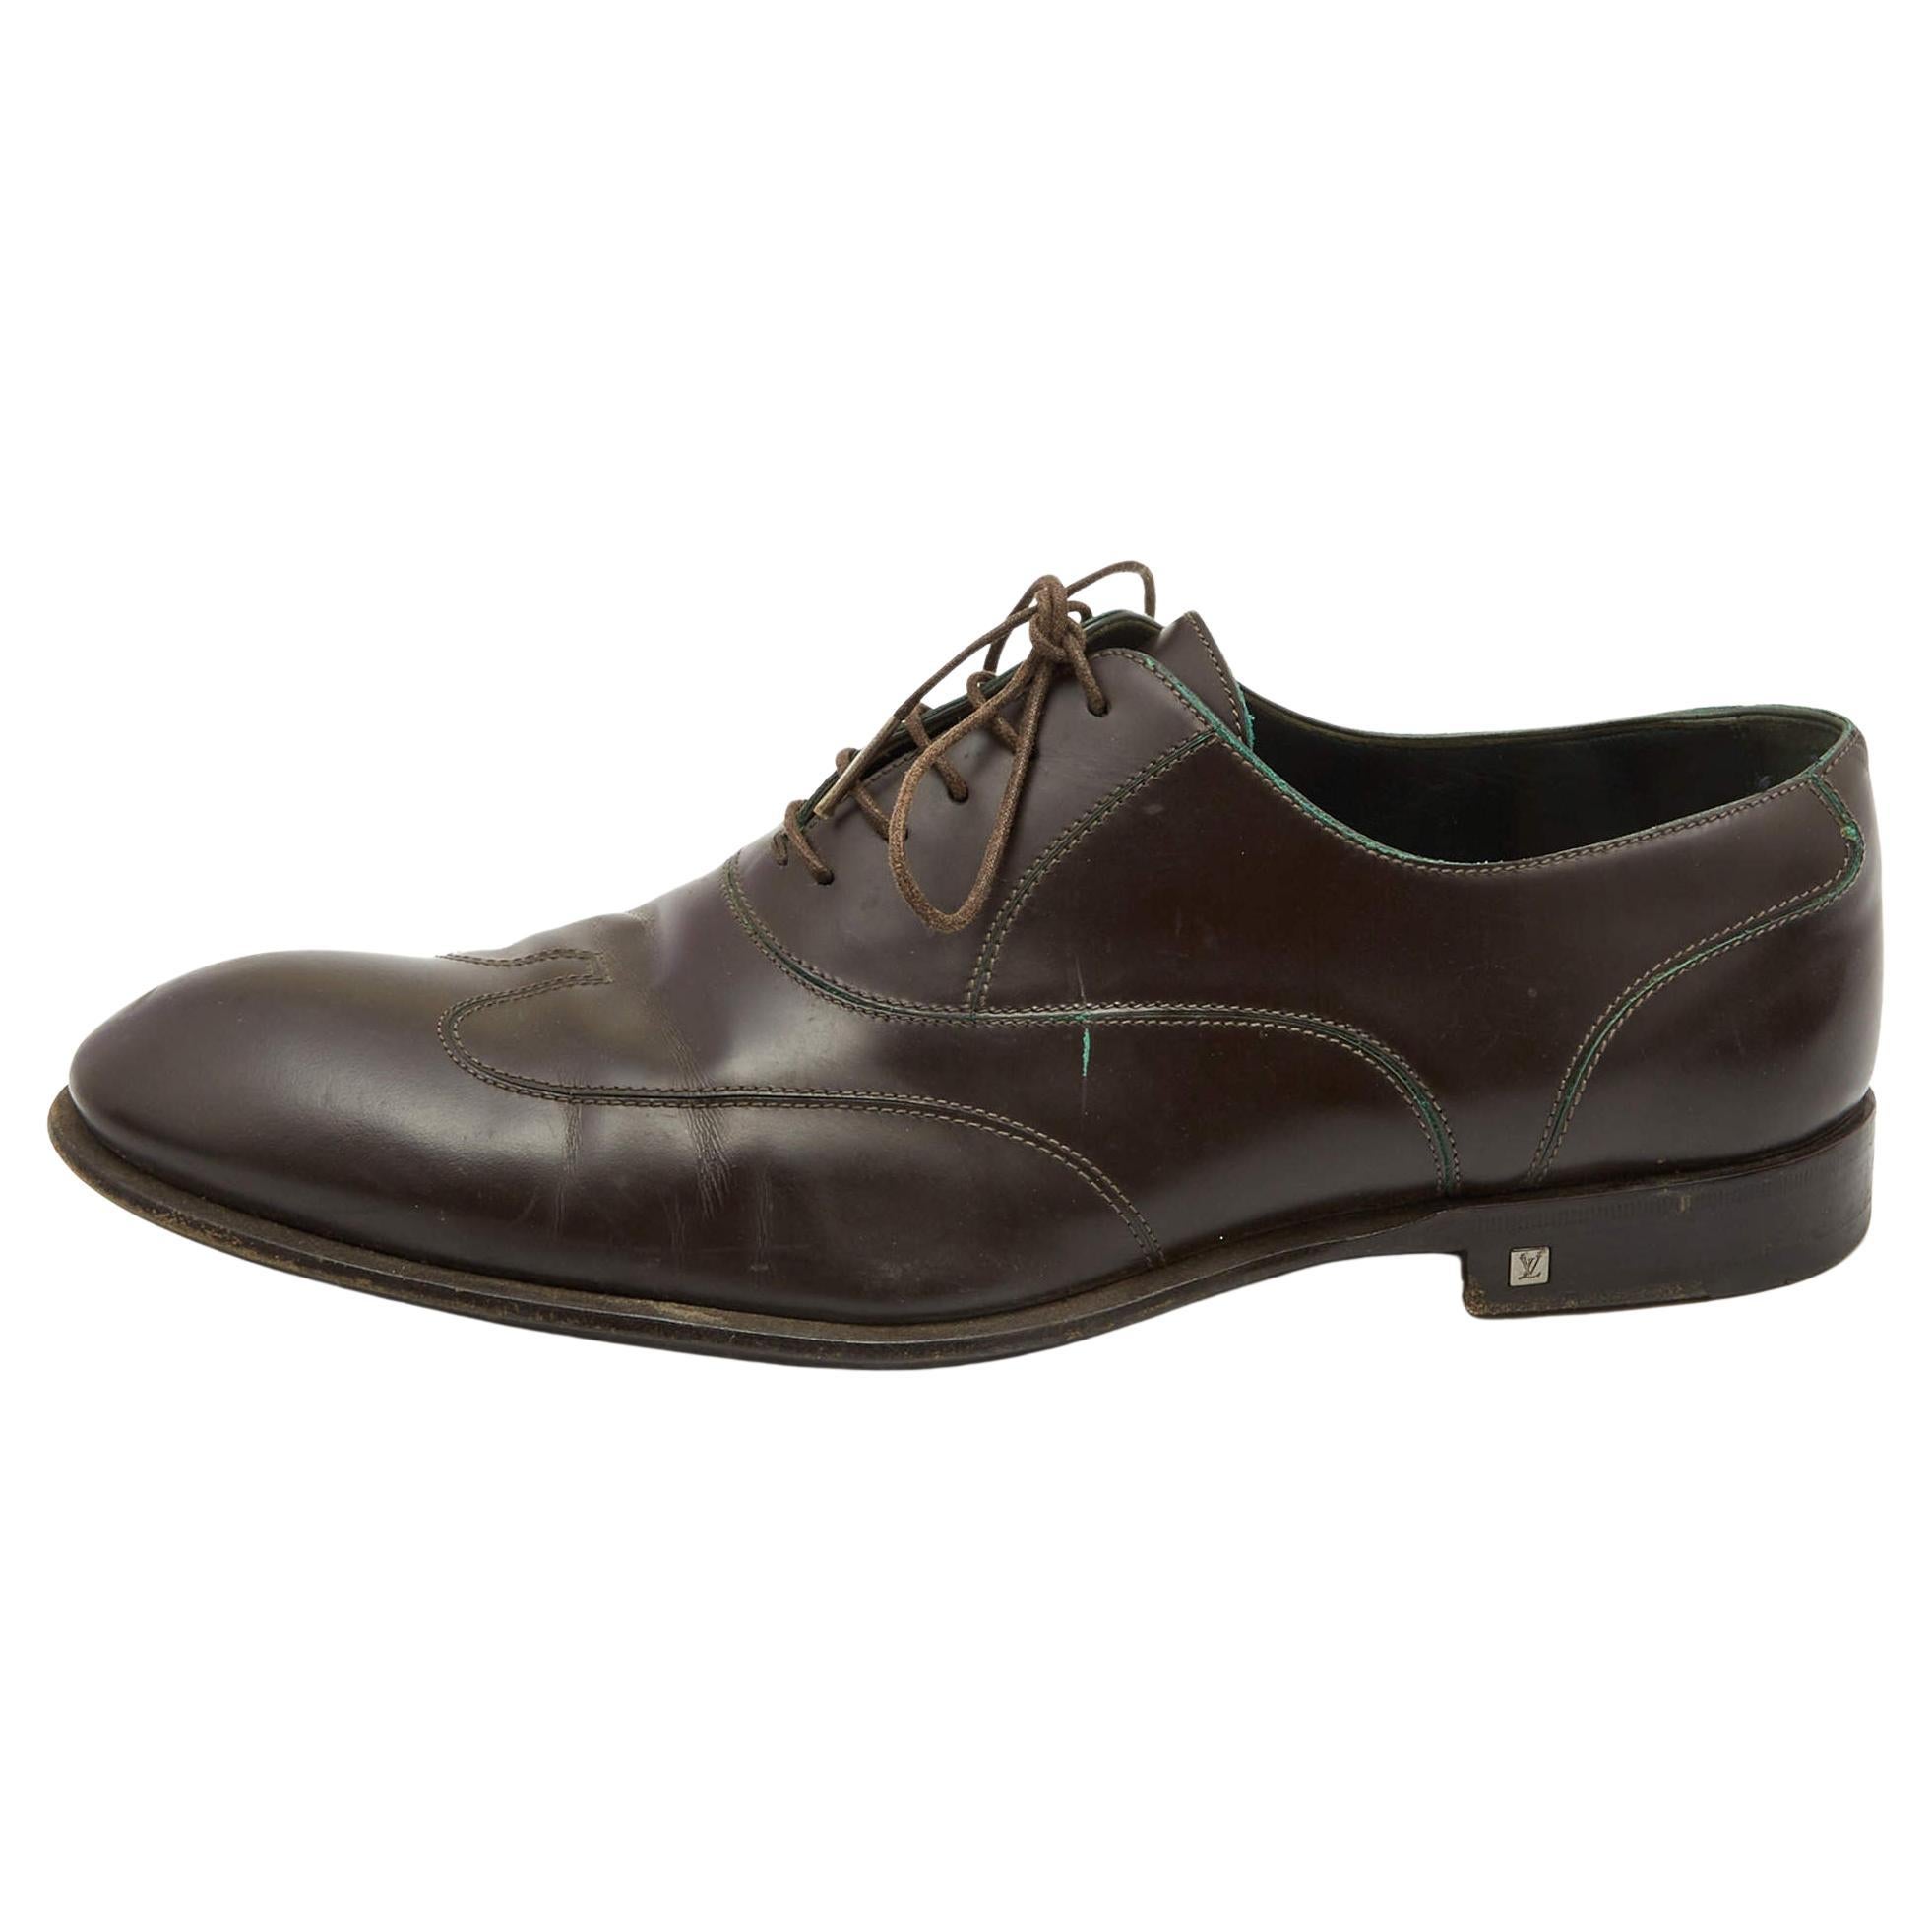 Louis Vuitton Dark Brown Leather Lace Up Oxfords Size 42.5 For Sale